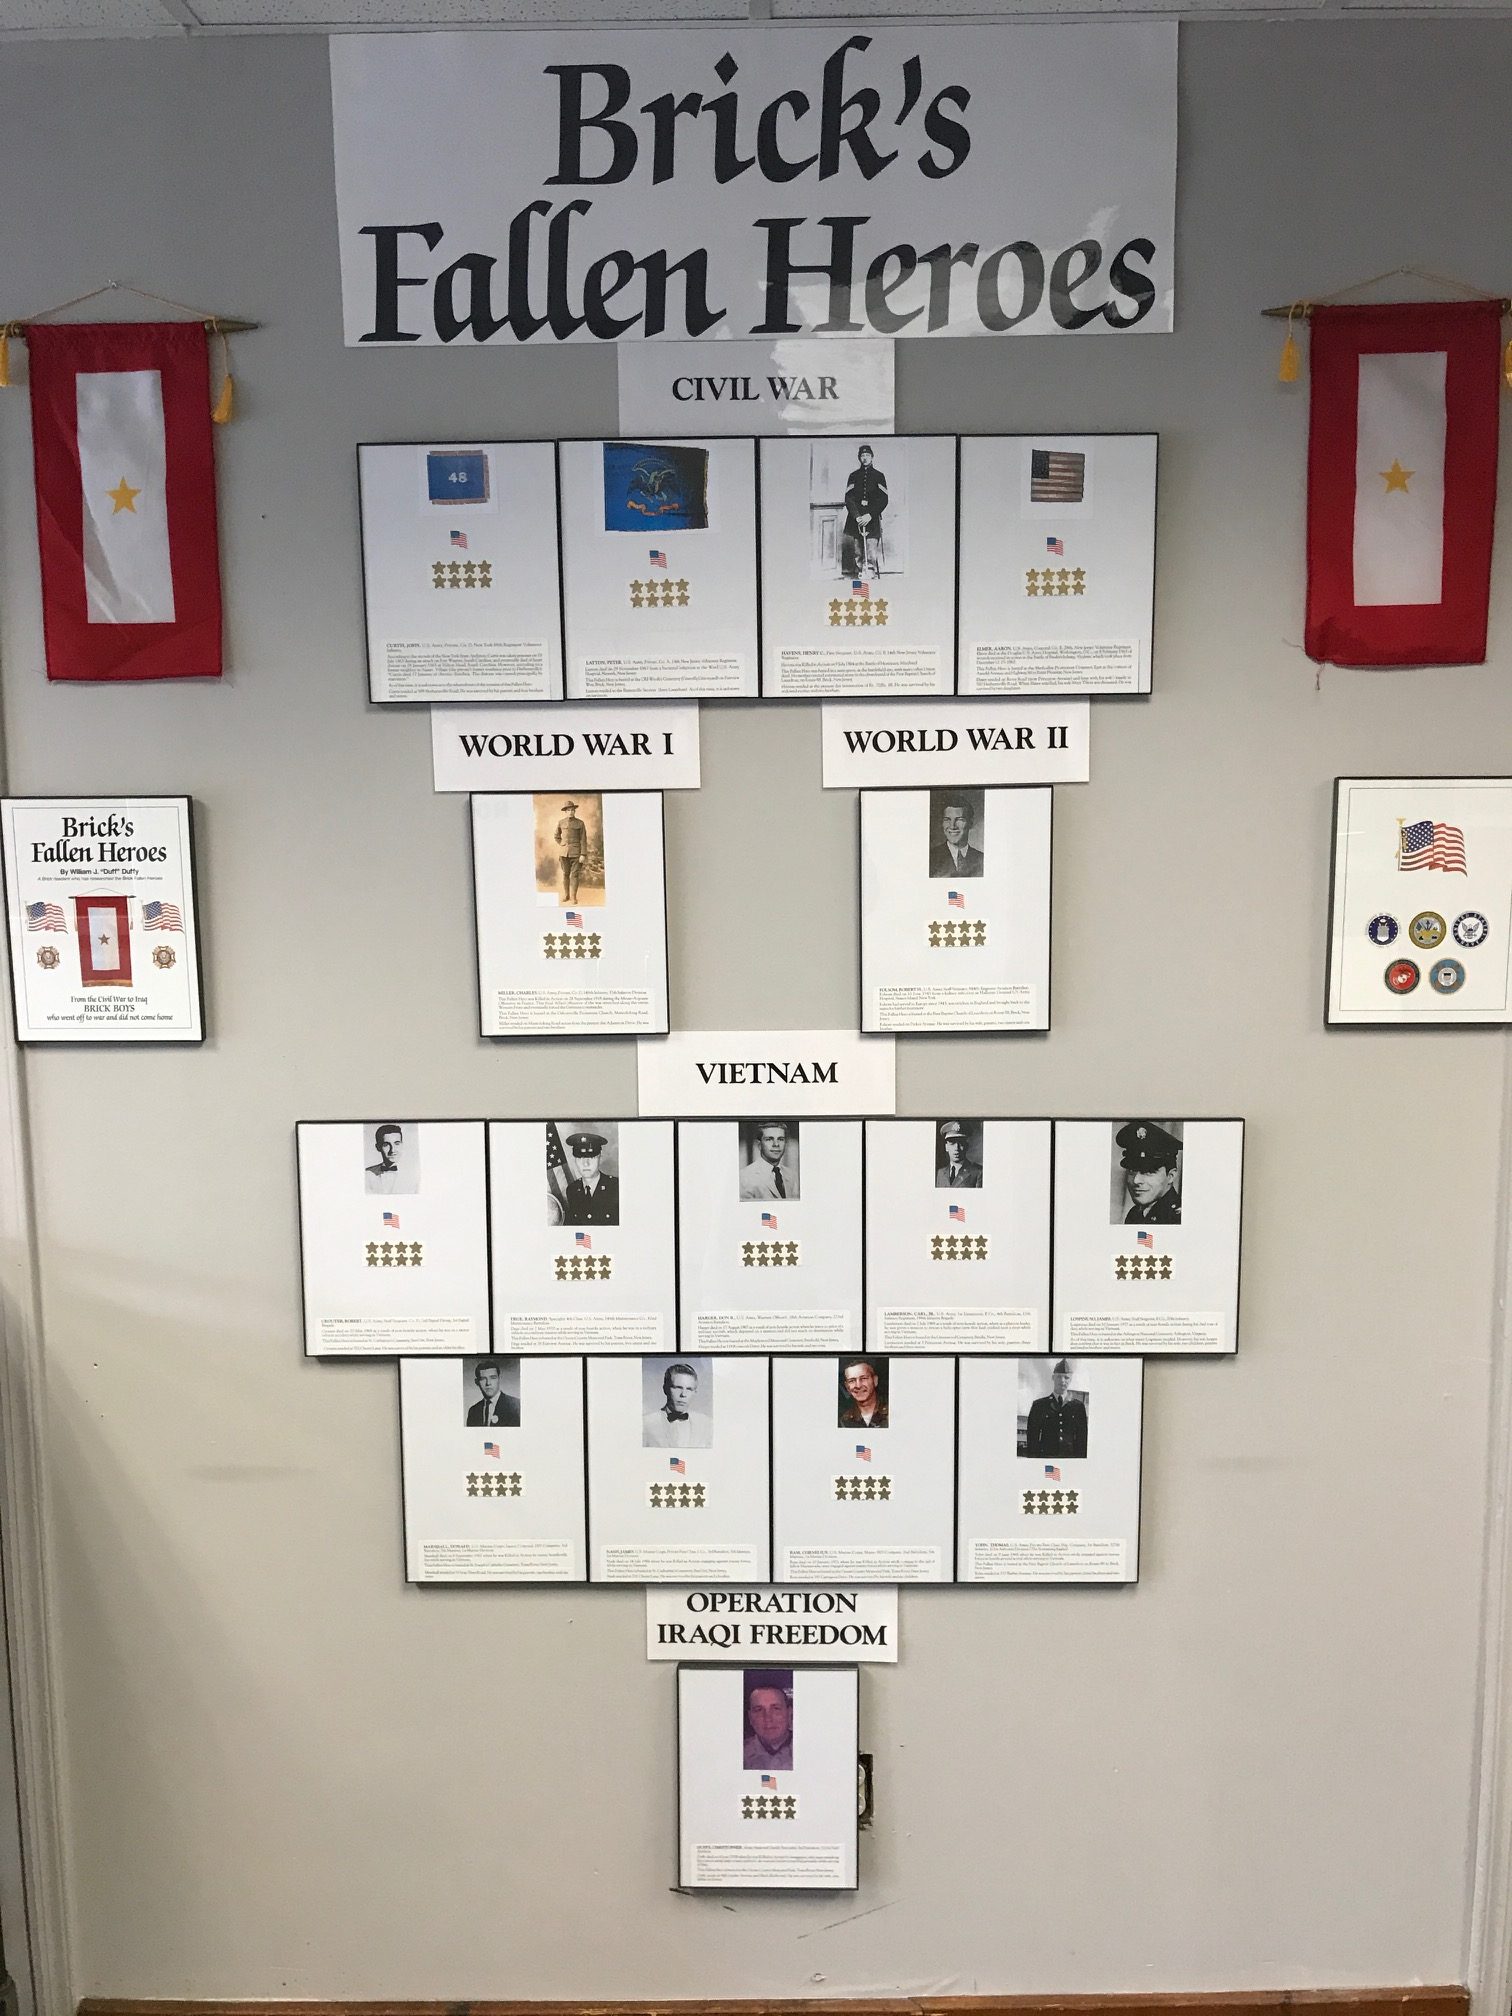 The Fallen Heroes display at the Brick VFW, which will host a special Memorial Day Weekend event sharing the biographies of these soldiers. (Photo by William Duffy)